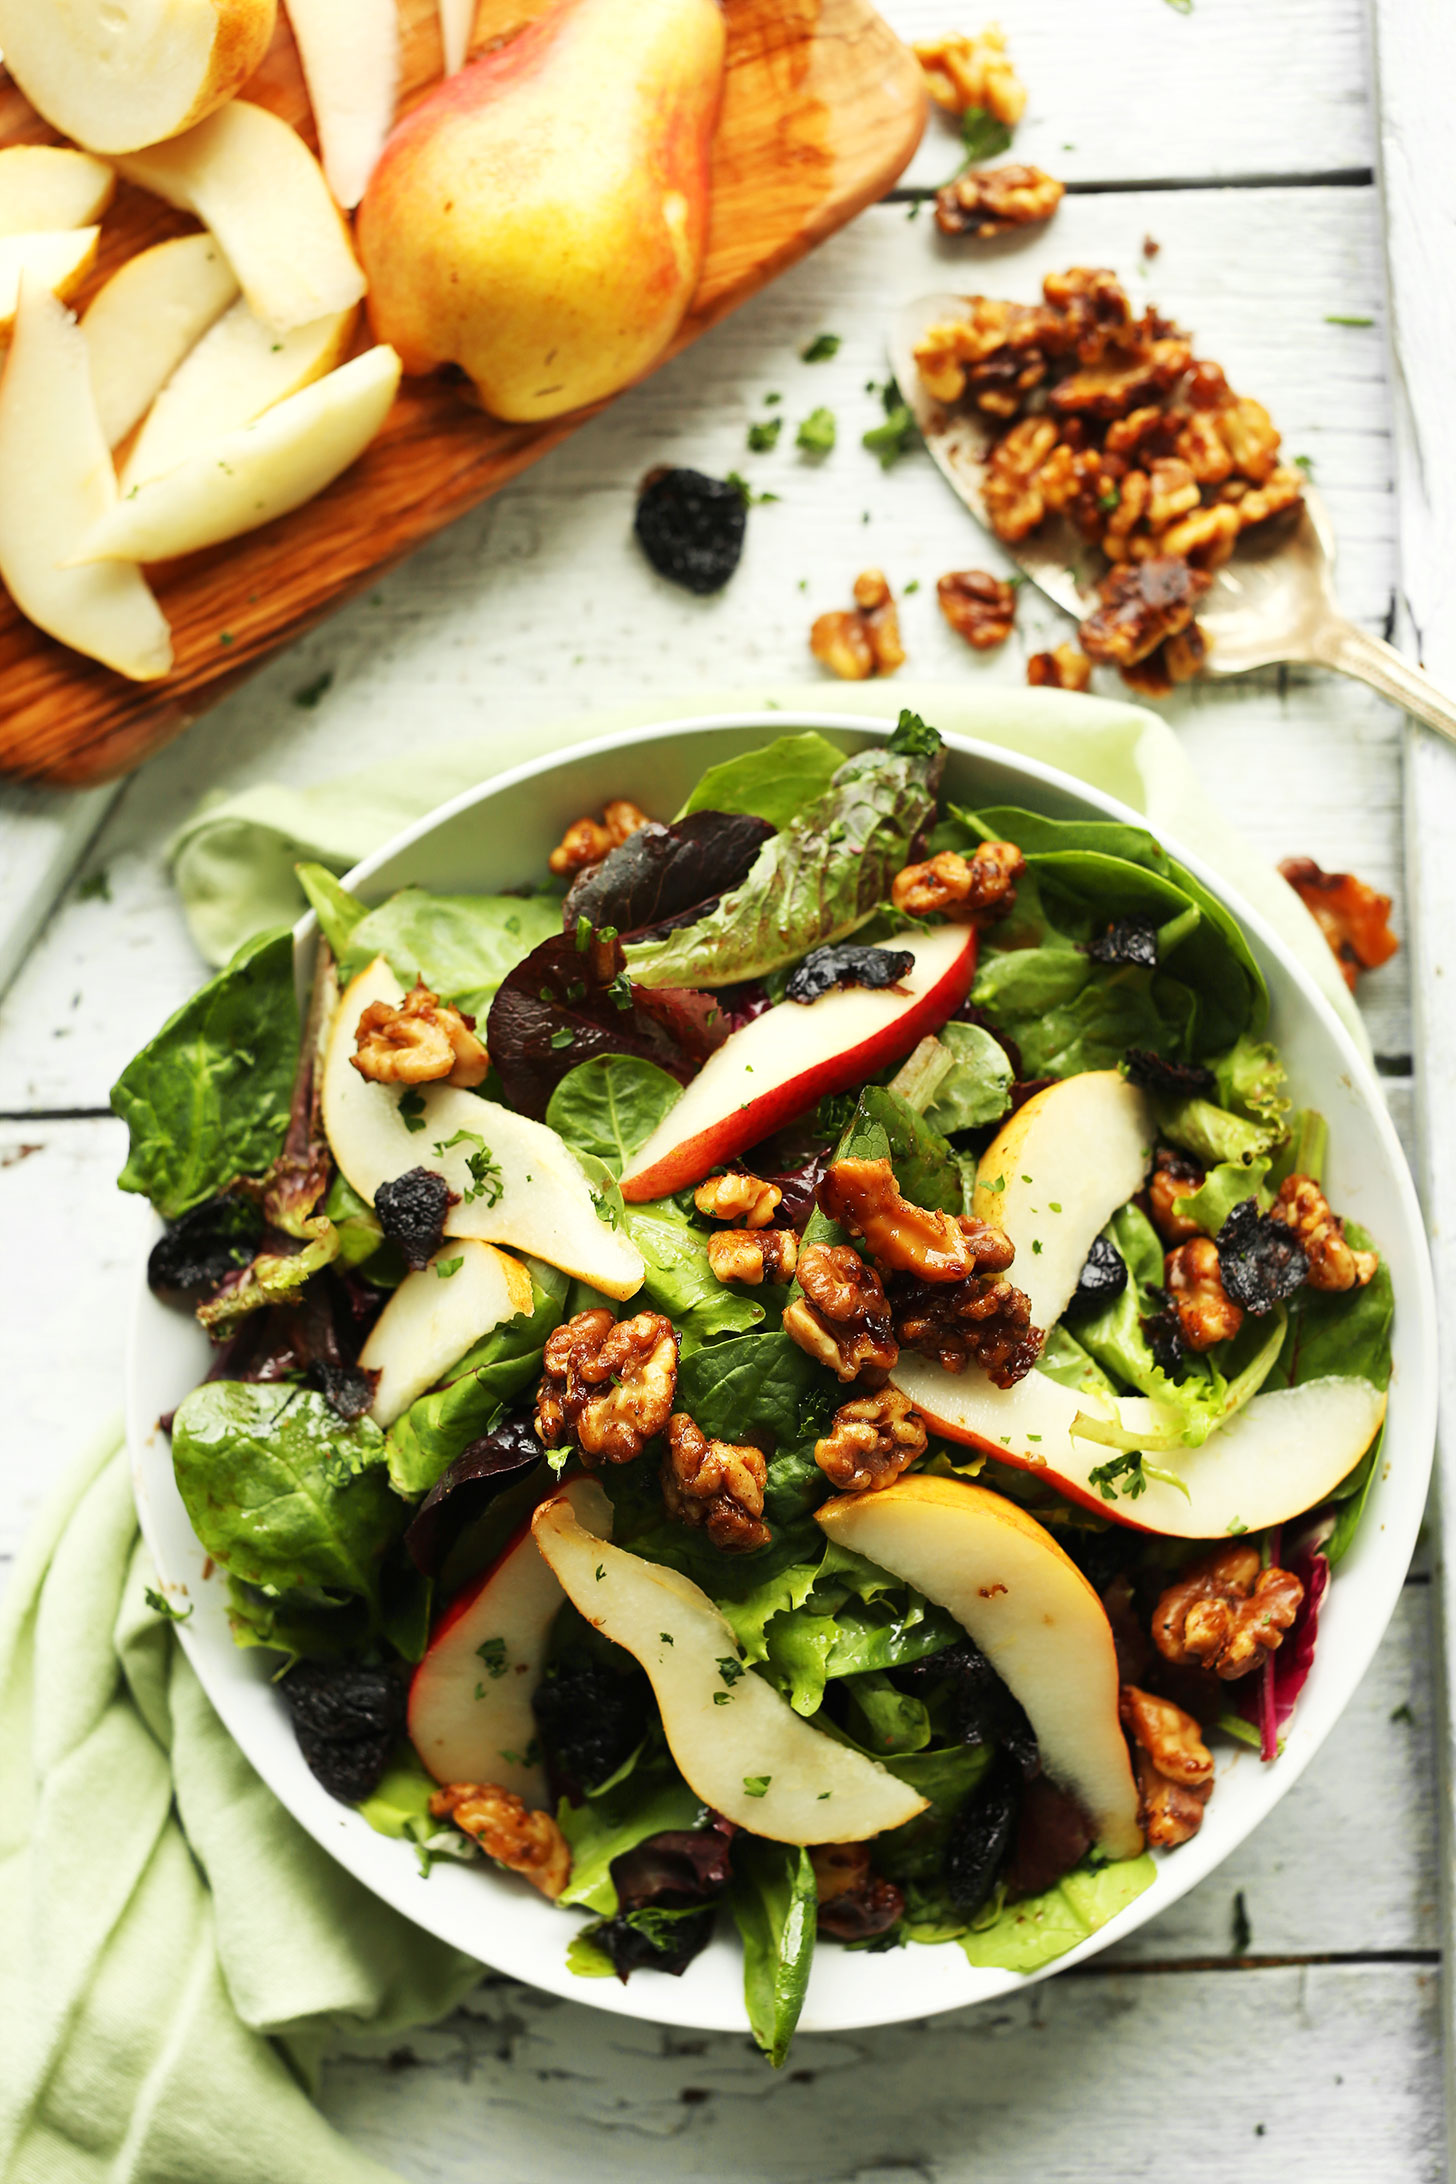 Bowl of our super simple salad made with pears, dried cherries, and candied walnuts